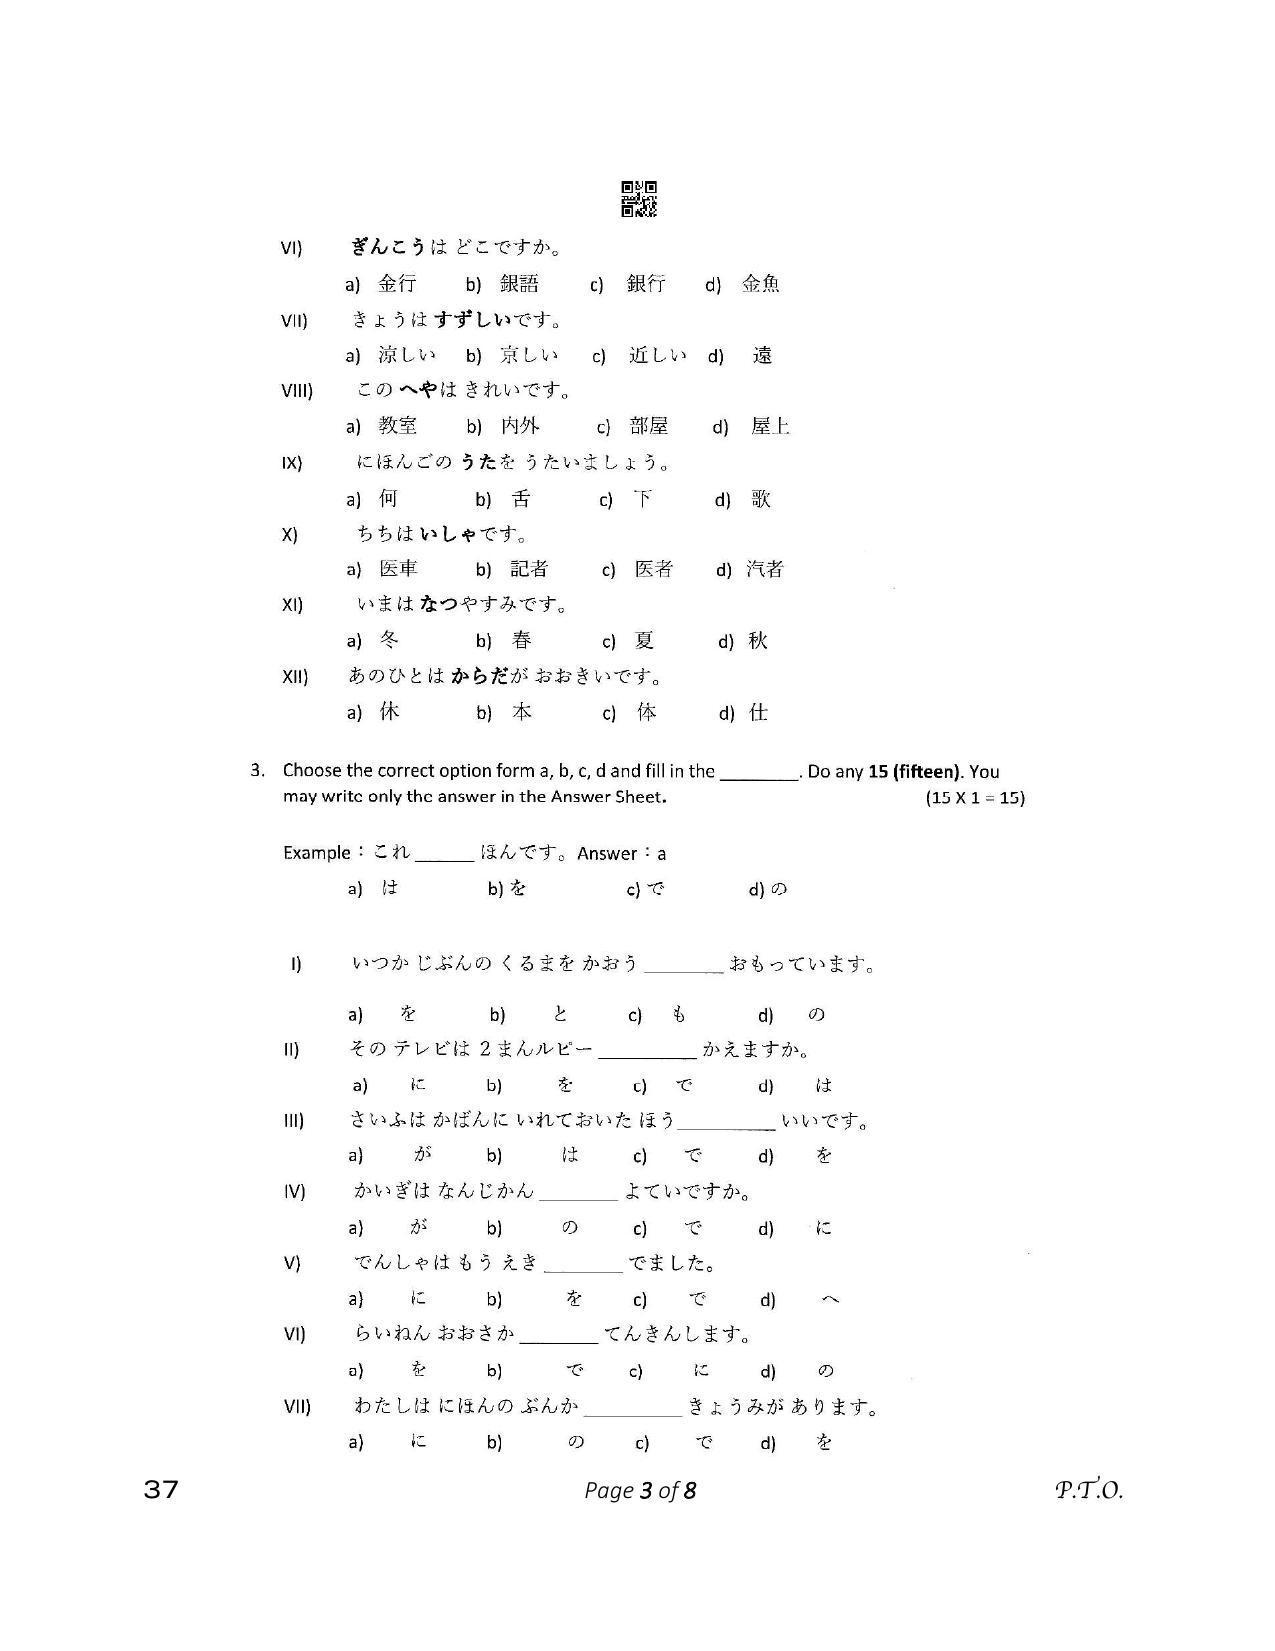 CBSE Class 12 37_Japanese 2023 Question Paper - Page 3